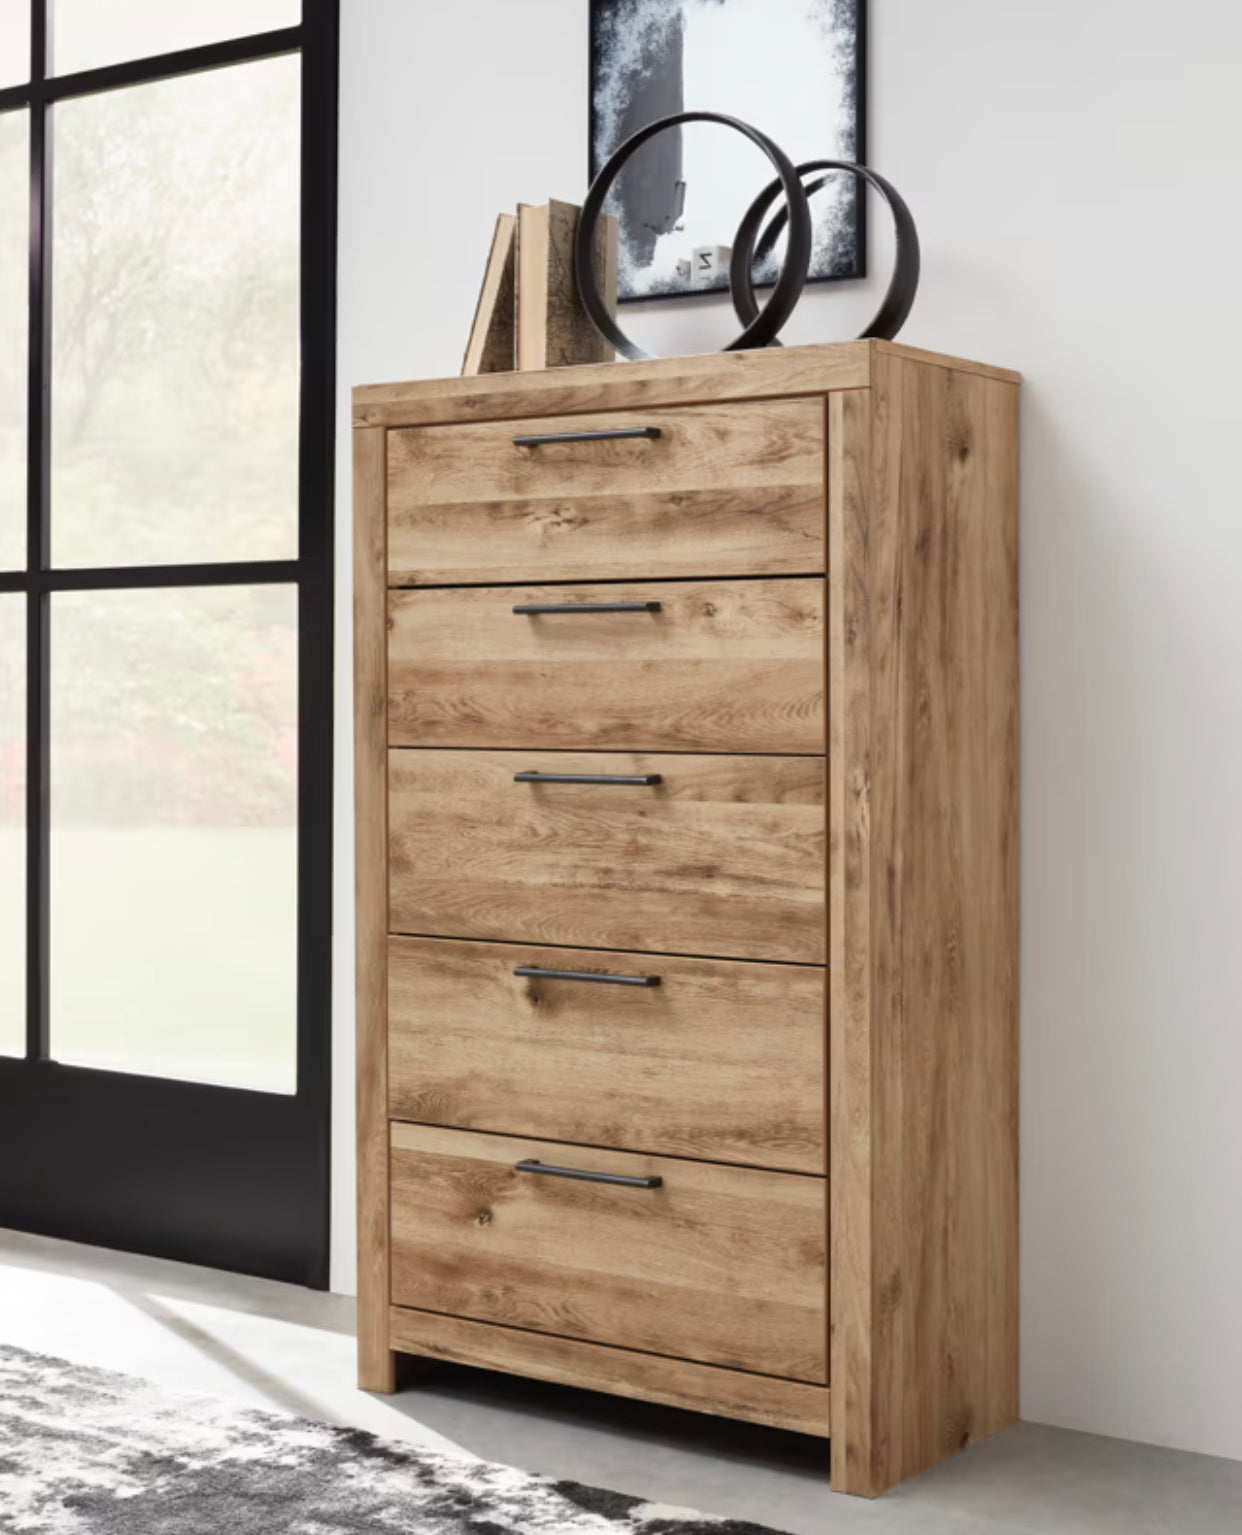 Hyanna Bedroom Collection - Ashley Furniture